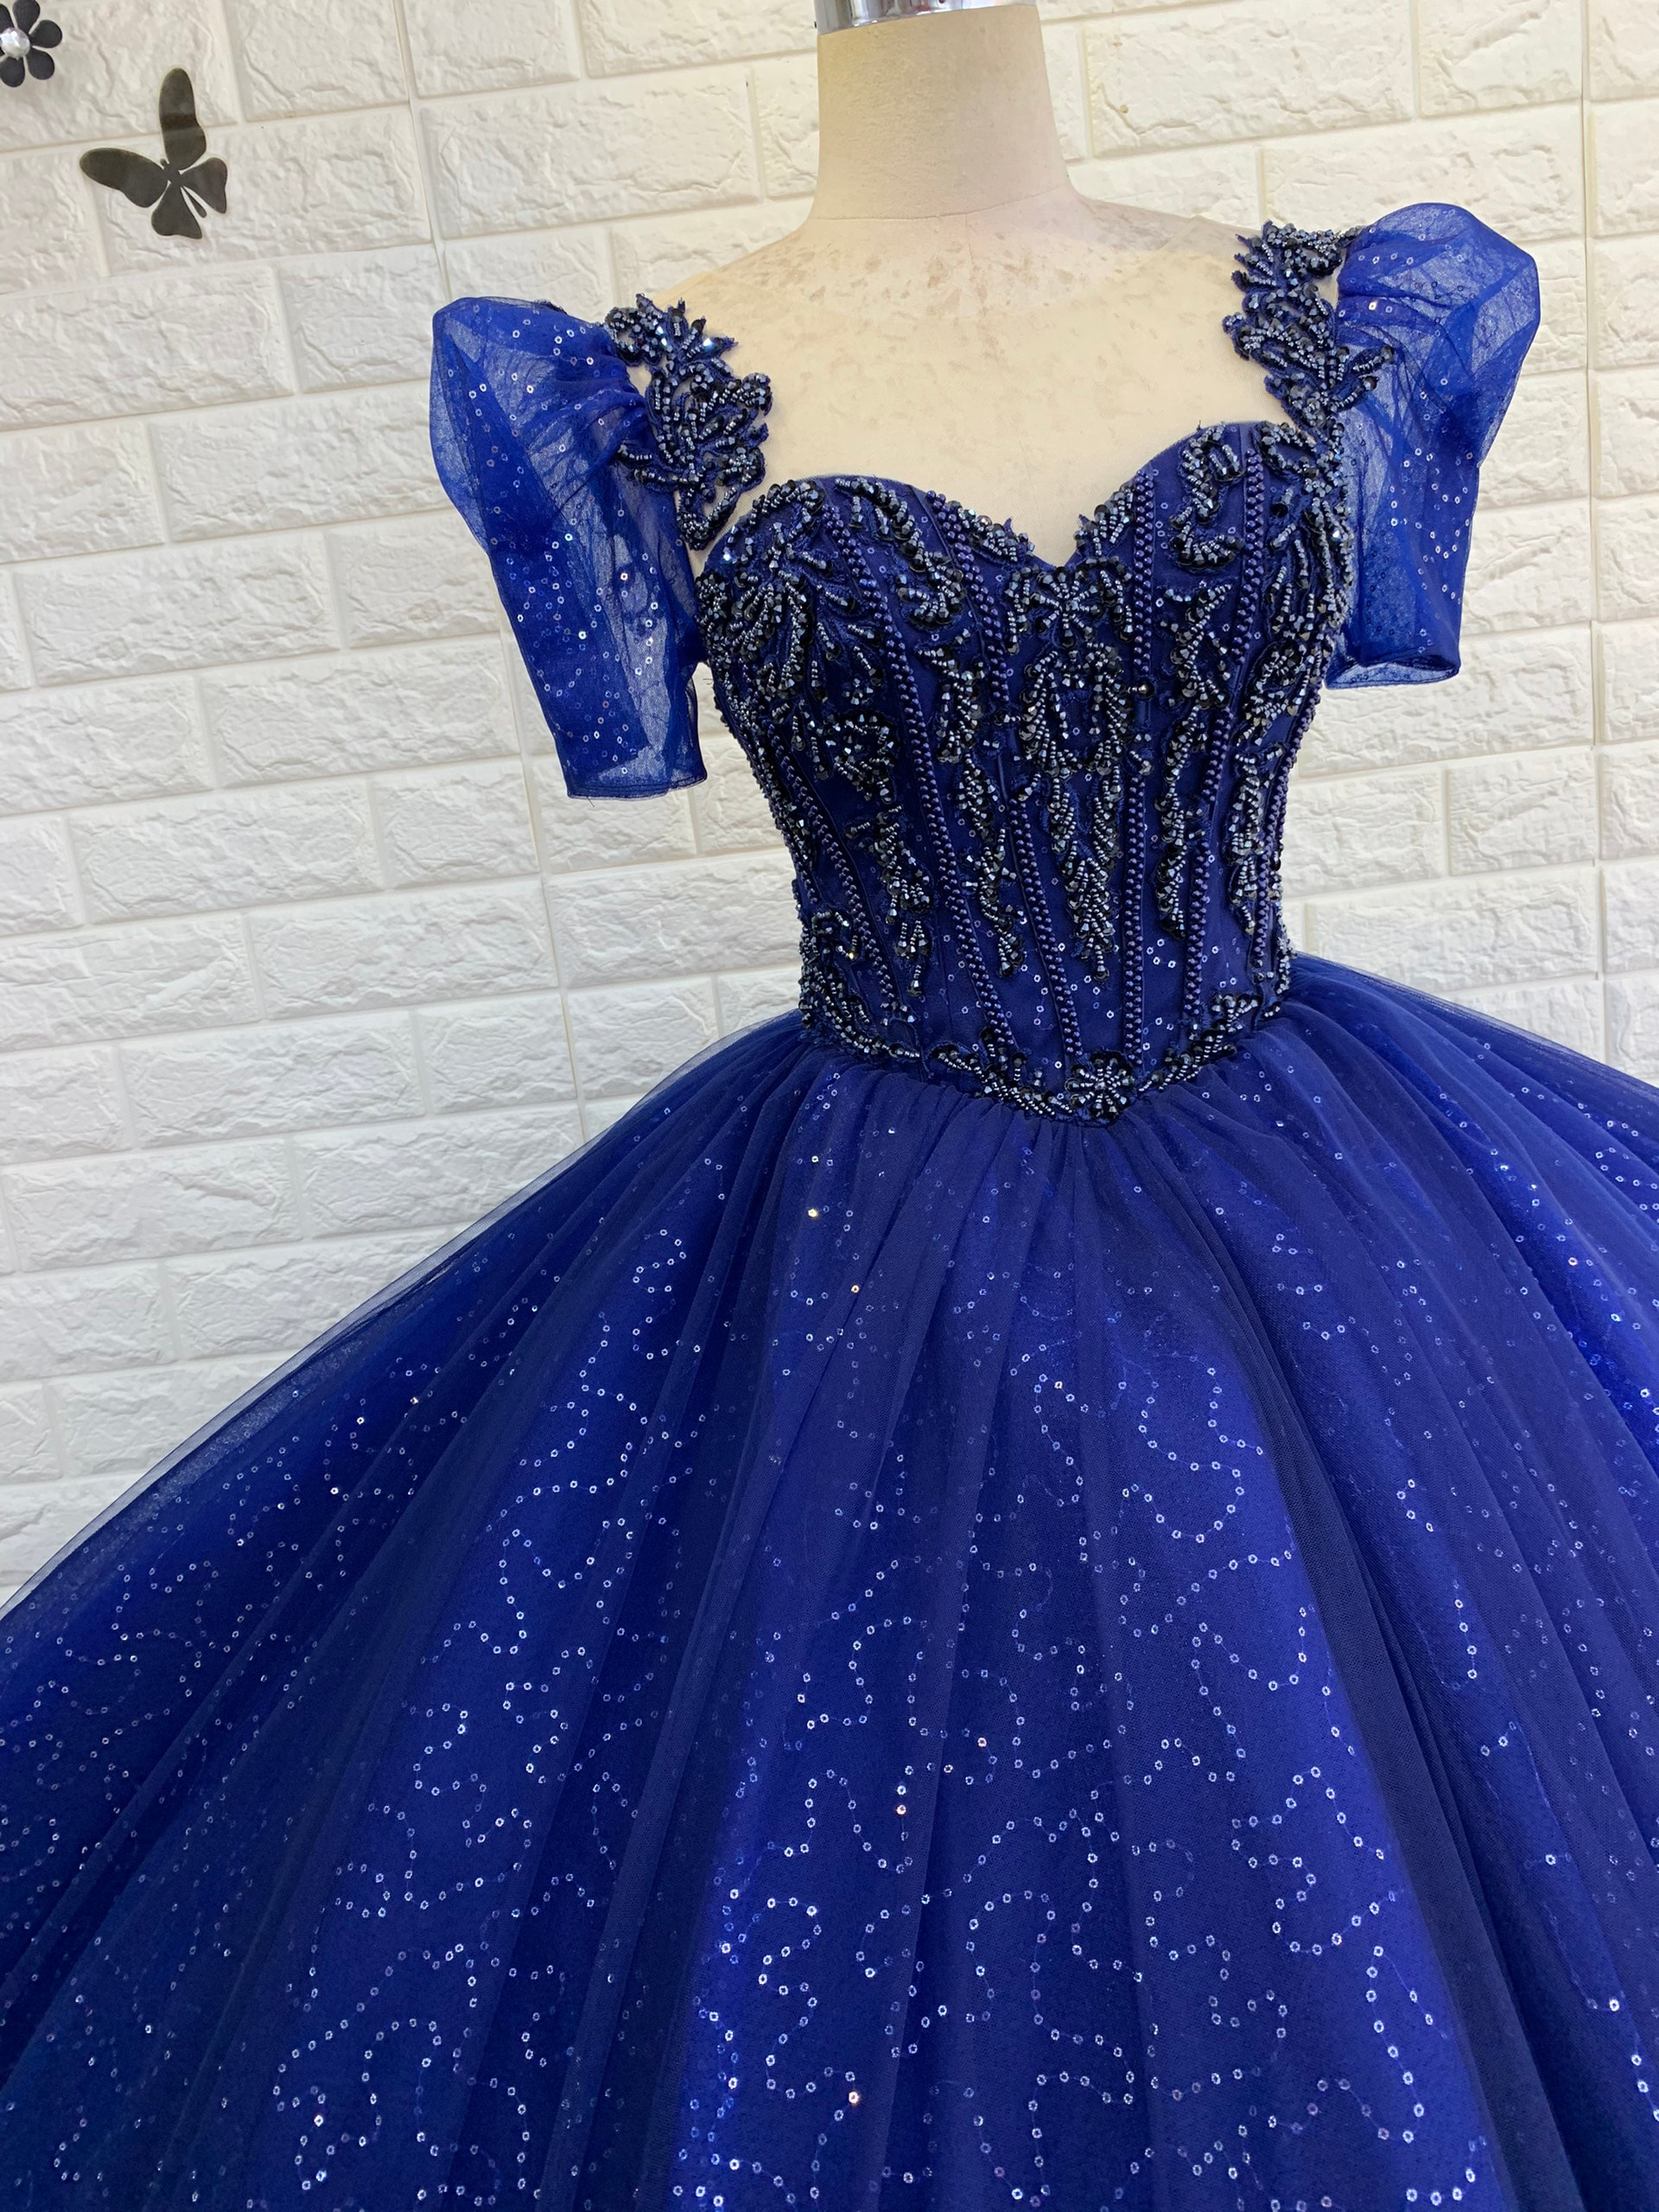 2022 Royal Blue Mermaid Blue Mermaid Prom Dress For Plus Size Black Girls  With Keyhole Neck, Long Sleeves, And 3D Florals Elegant Formal Evening Gown  For African Evening Parties From Bridalstore, $144.28 |